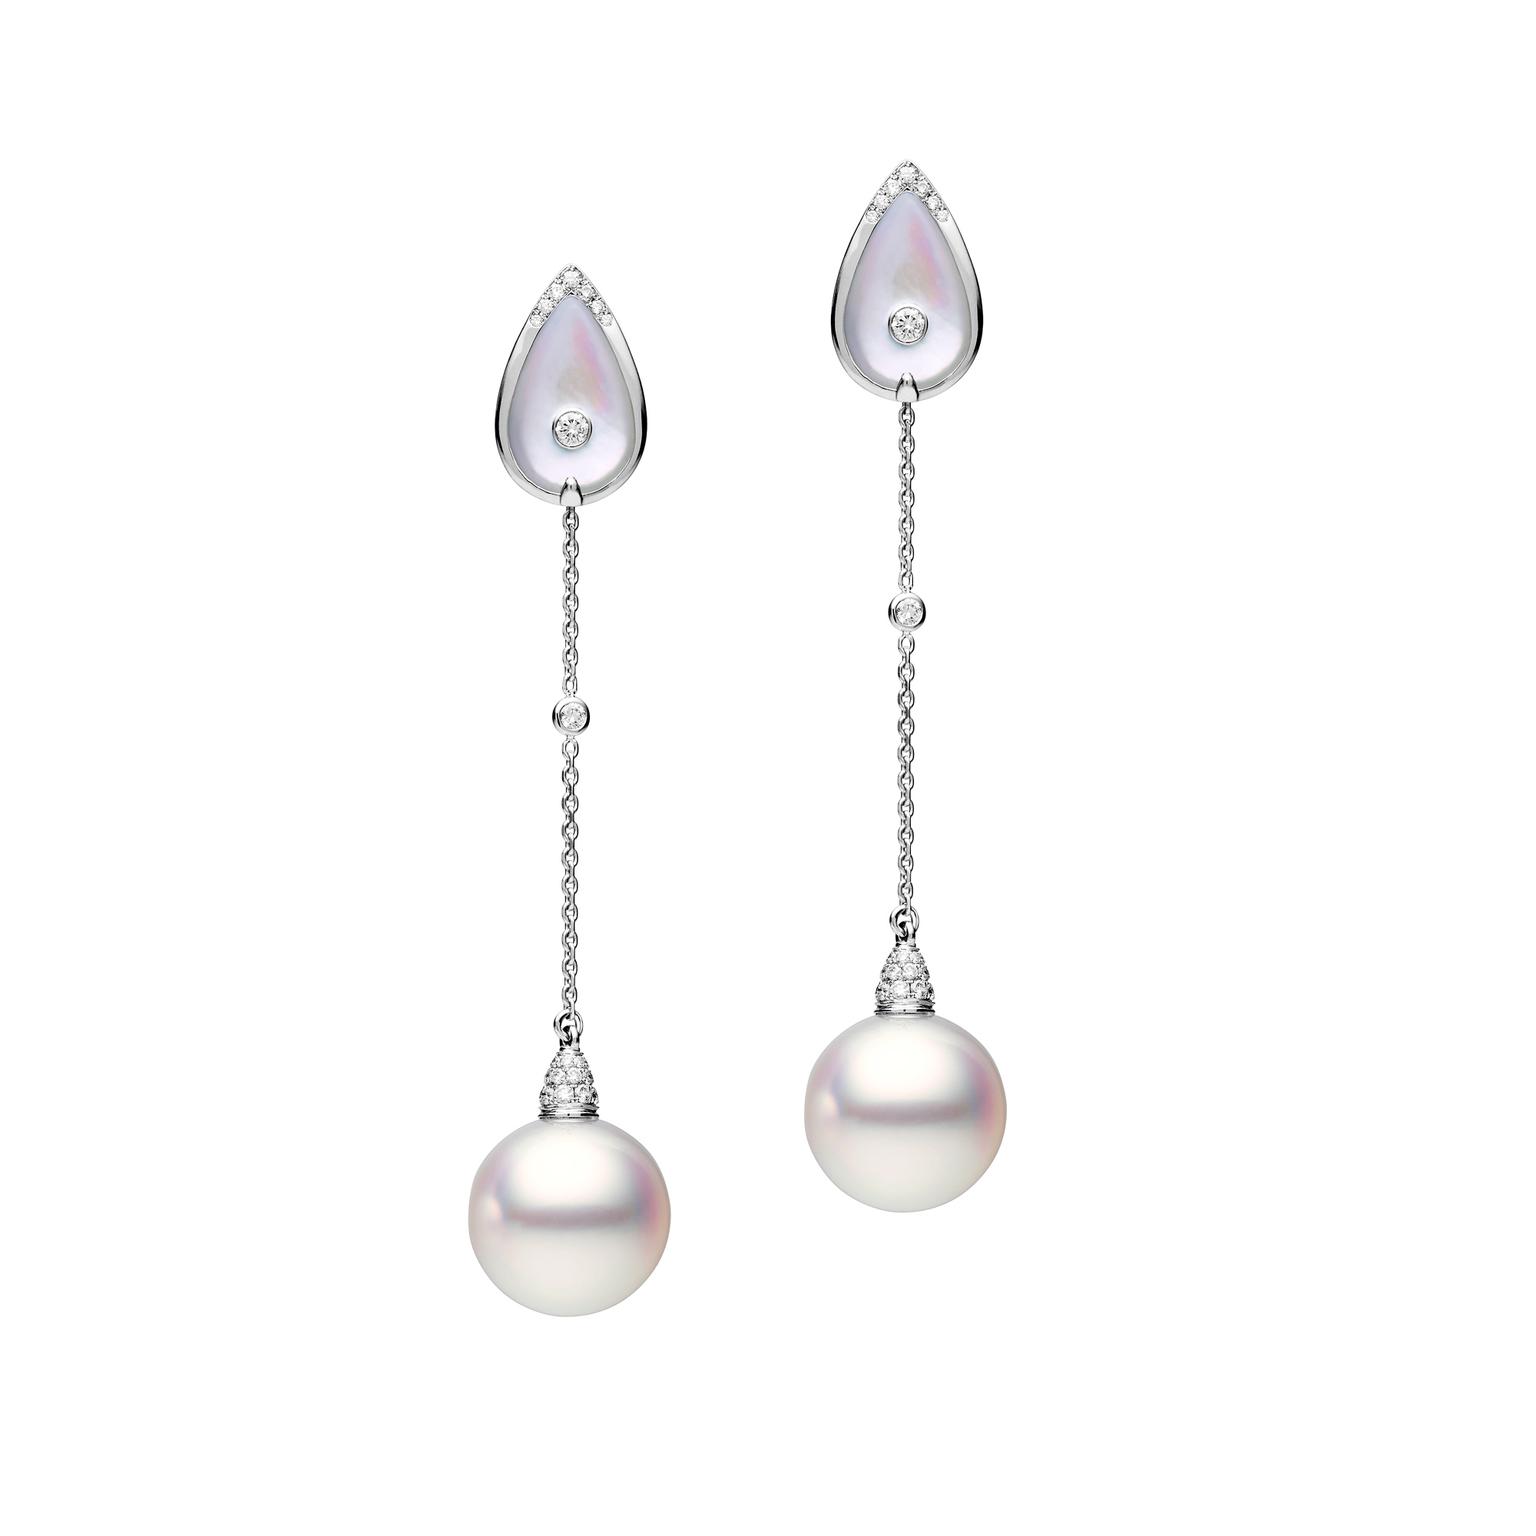 Paspaley Maxima mother-of-pearl and diamond earrings